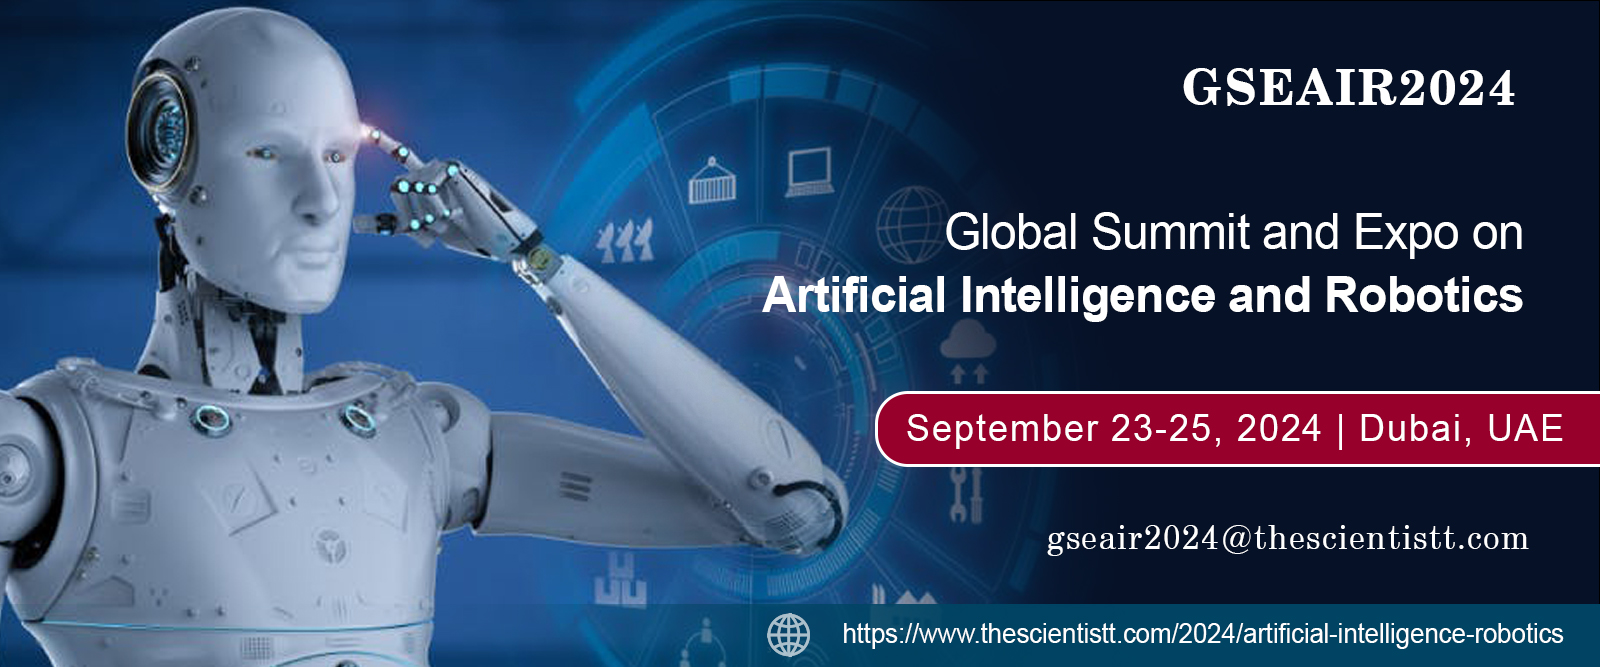 4th Global Summit and Expo on Artificial Intelligence and Robotics - GSEAIR2024